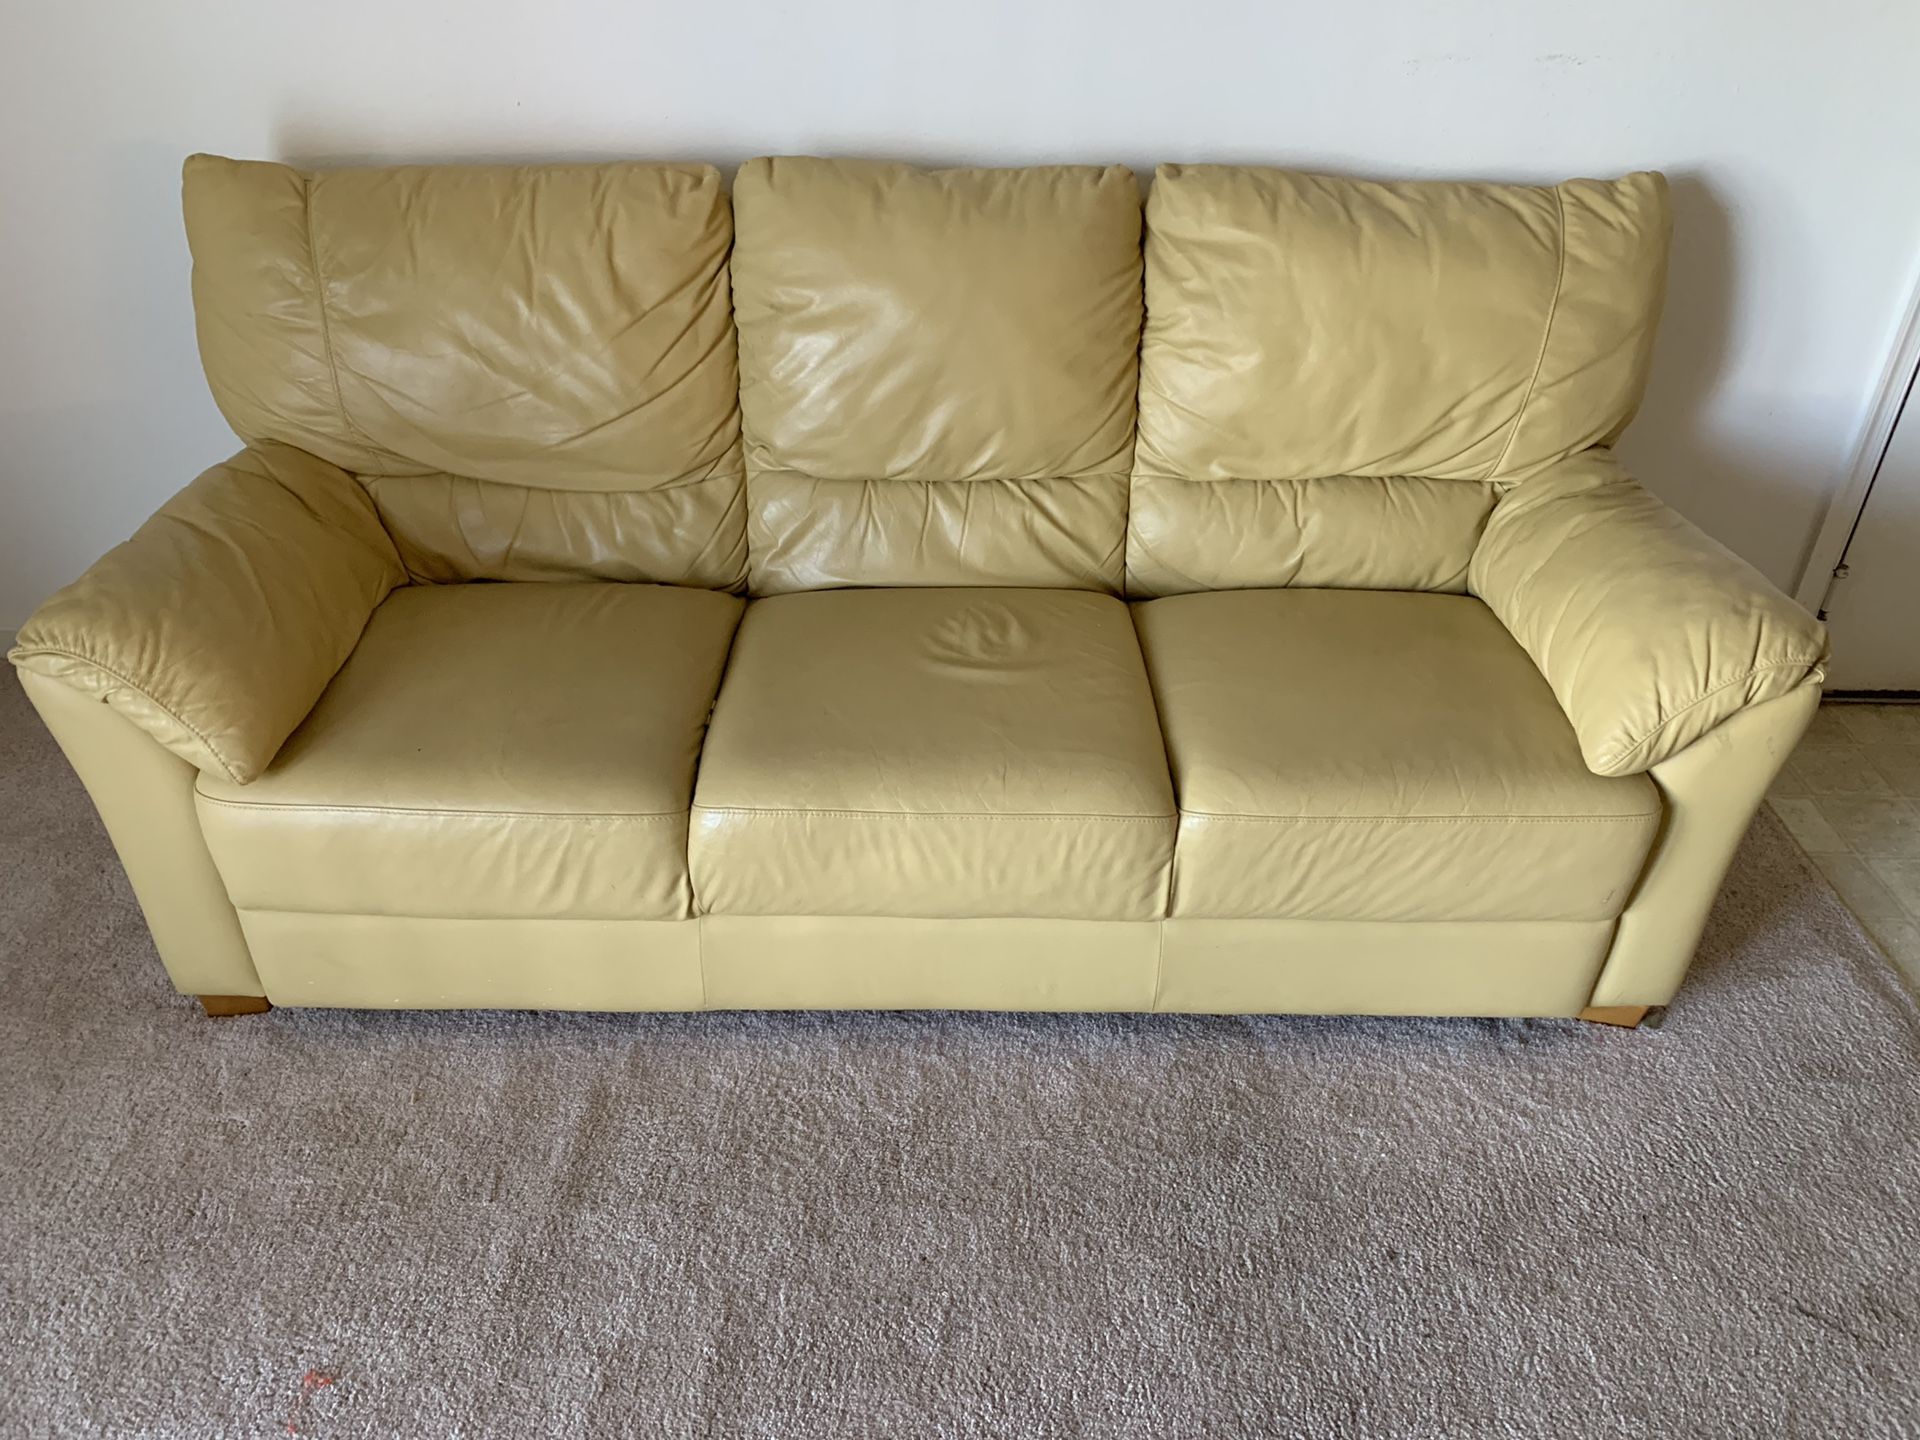 2 leather couches and large leather chair